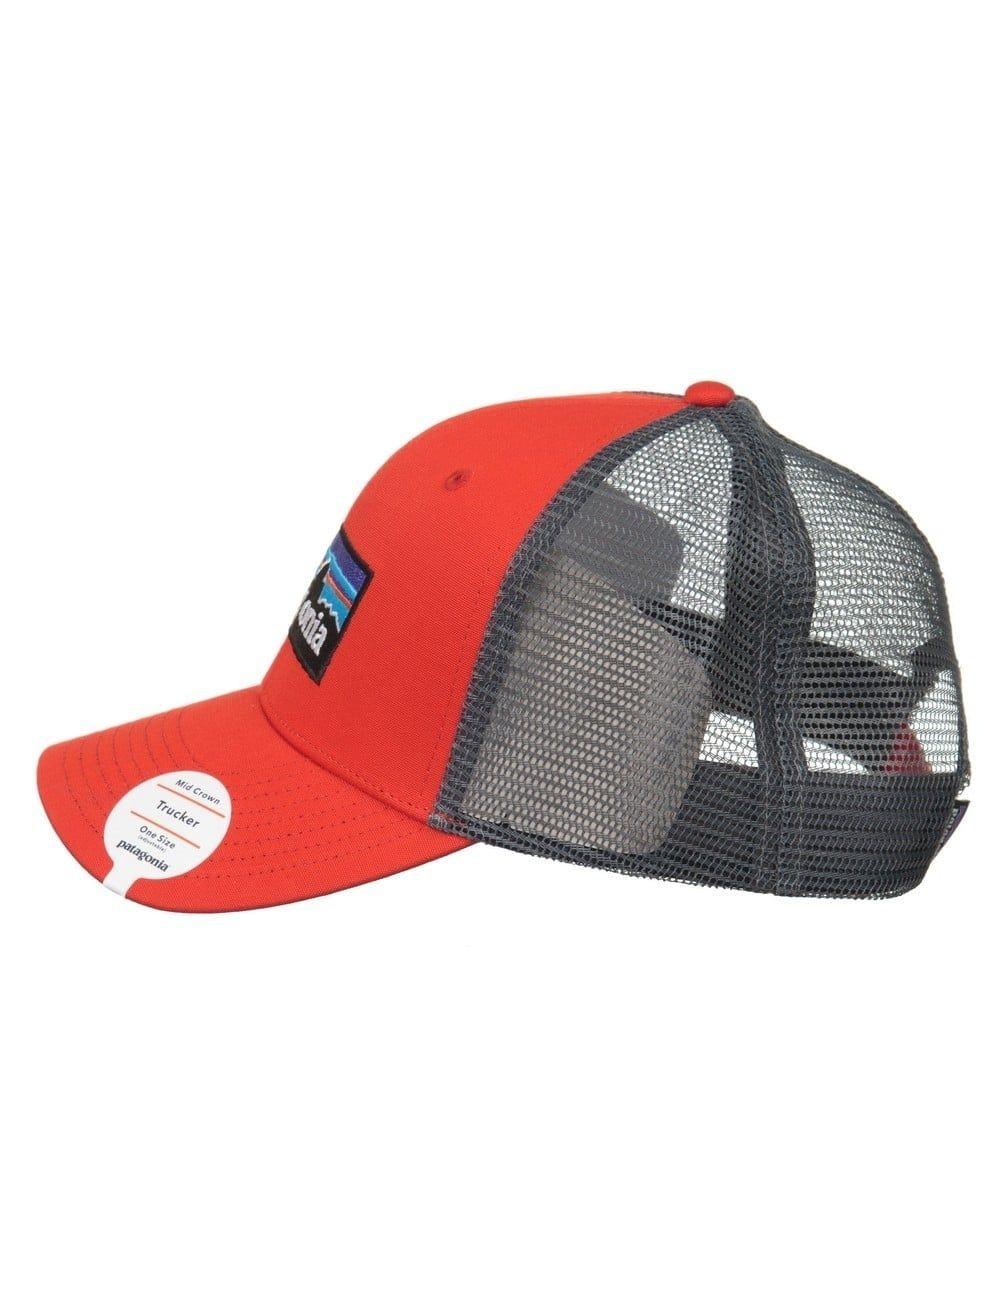 Red French Logo - Patagonia P-6 Logo Trucker Hat - French Red - Patagonia from iConsume UK